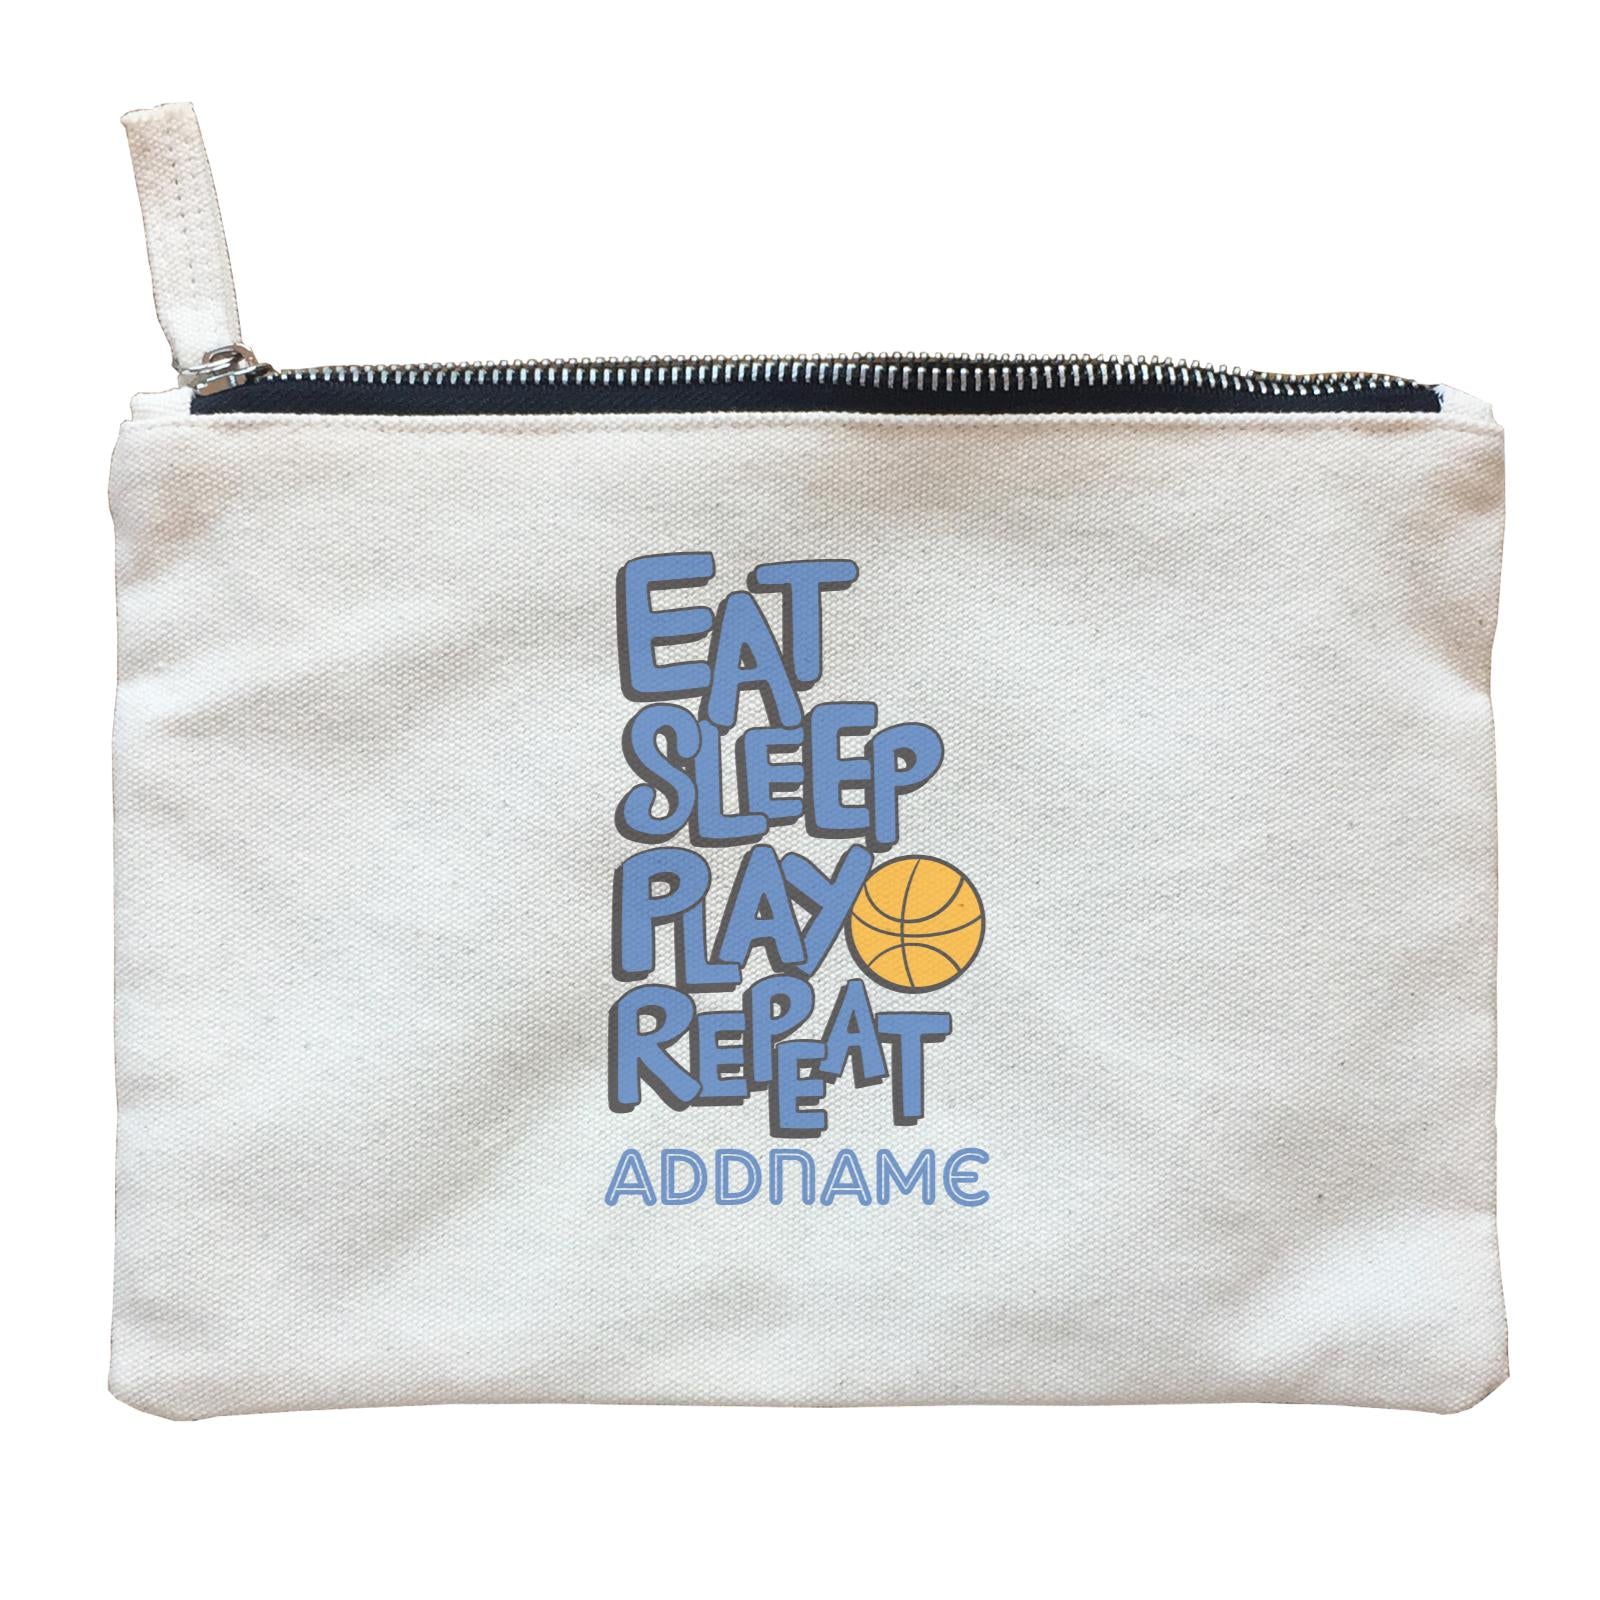 Cool Cute Words Eat Sleep Play Repeat Addname Zipper Pouch